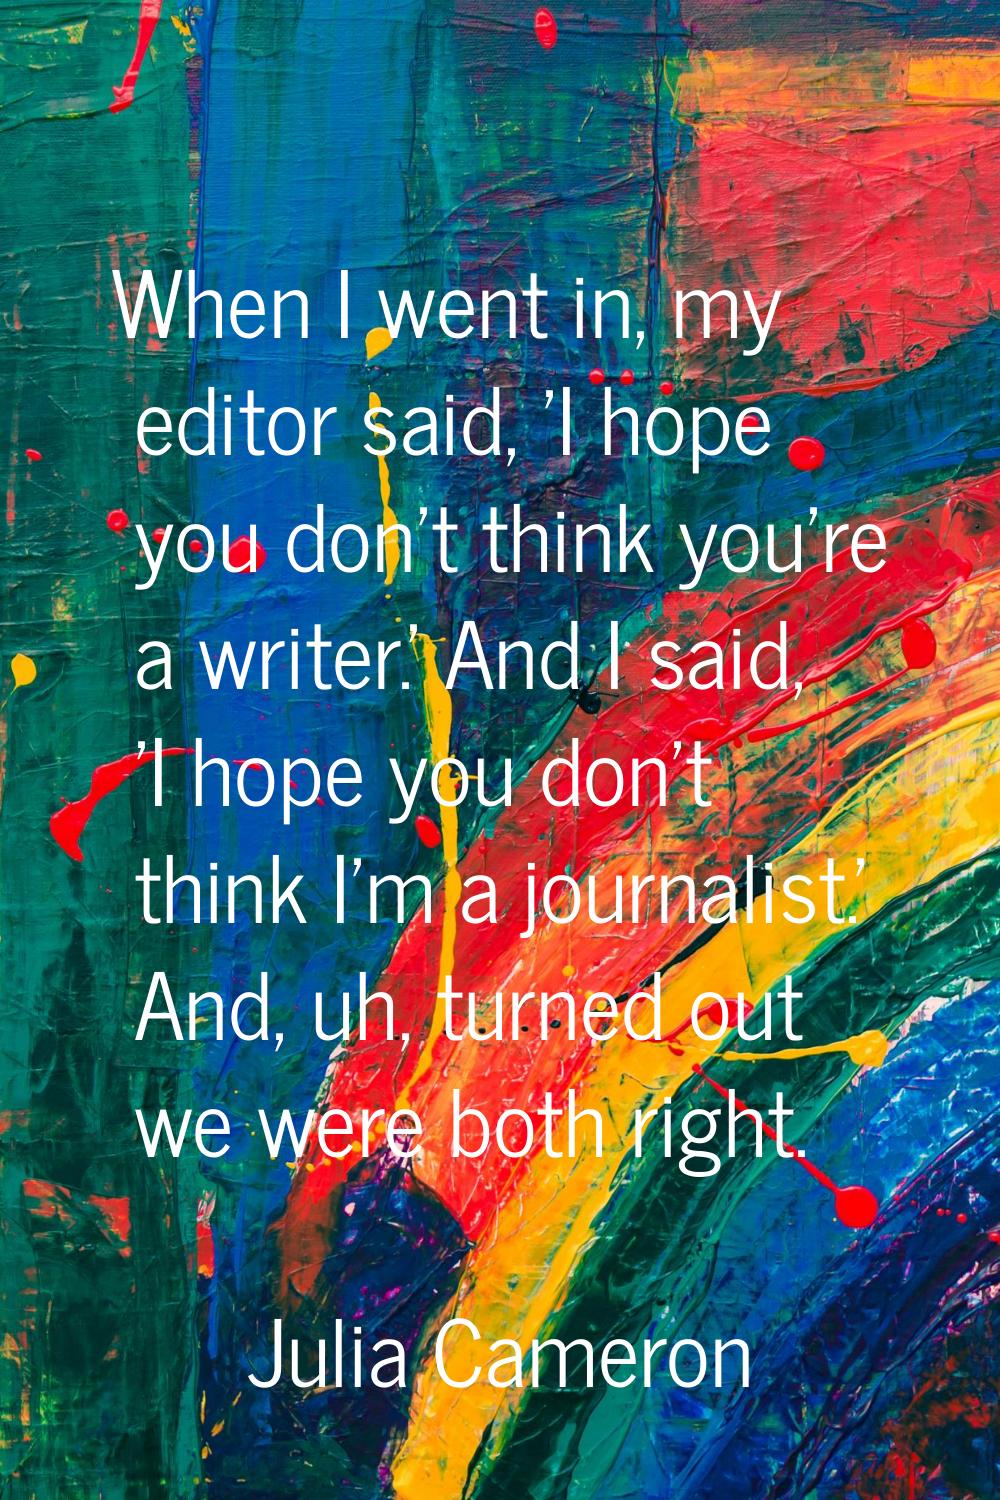 When I went in, my editor said, 'I hope you don't think you're a writer.' And I said, 'I hope you d